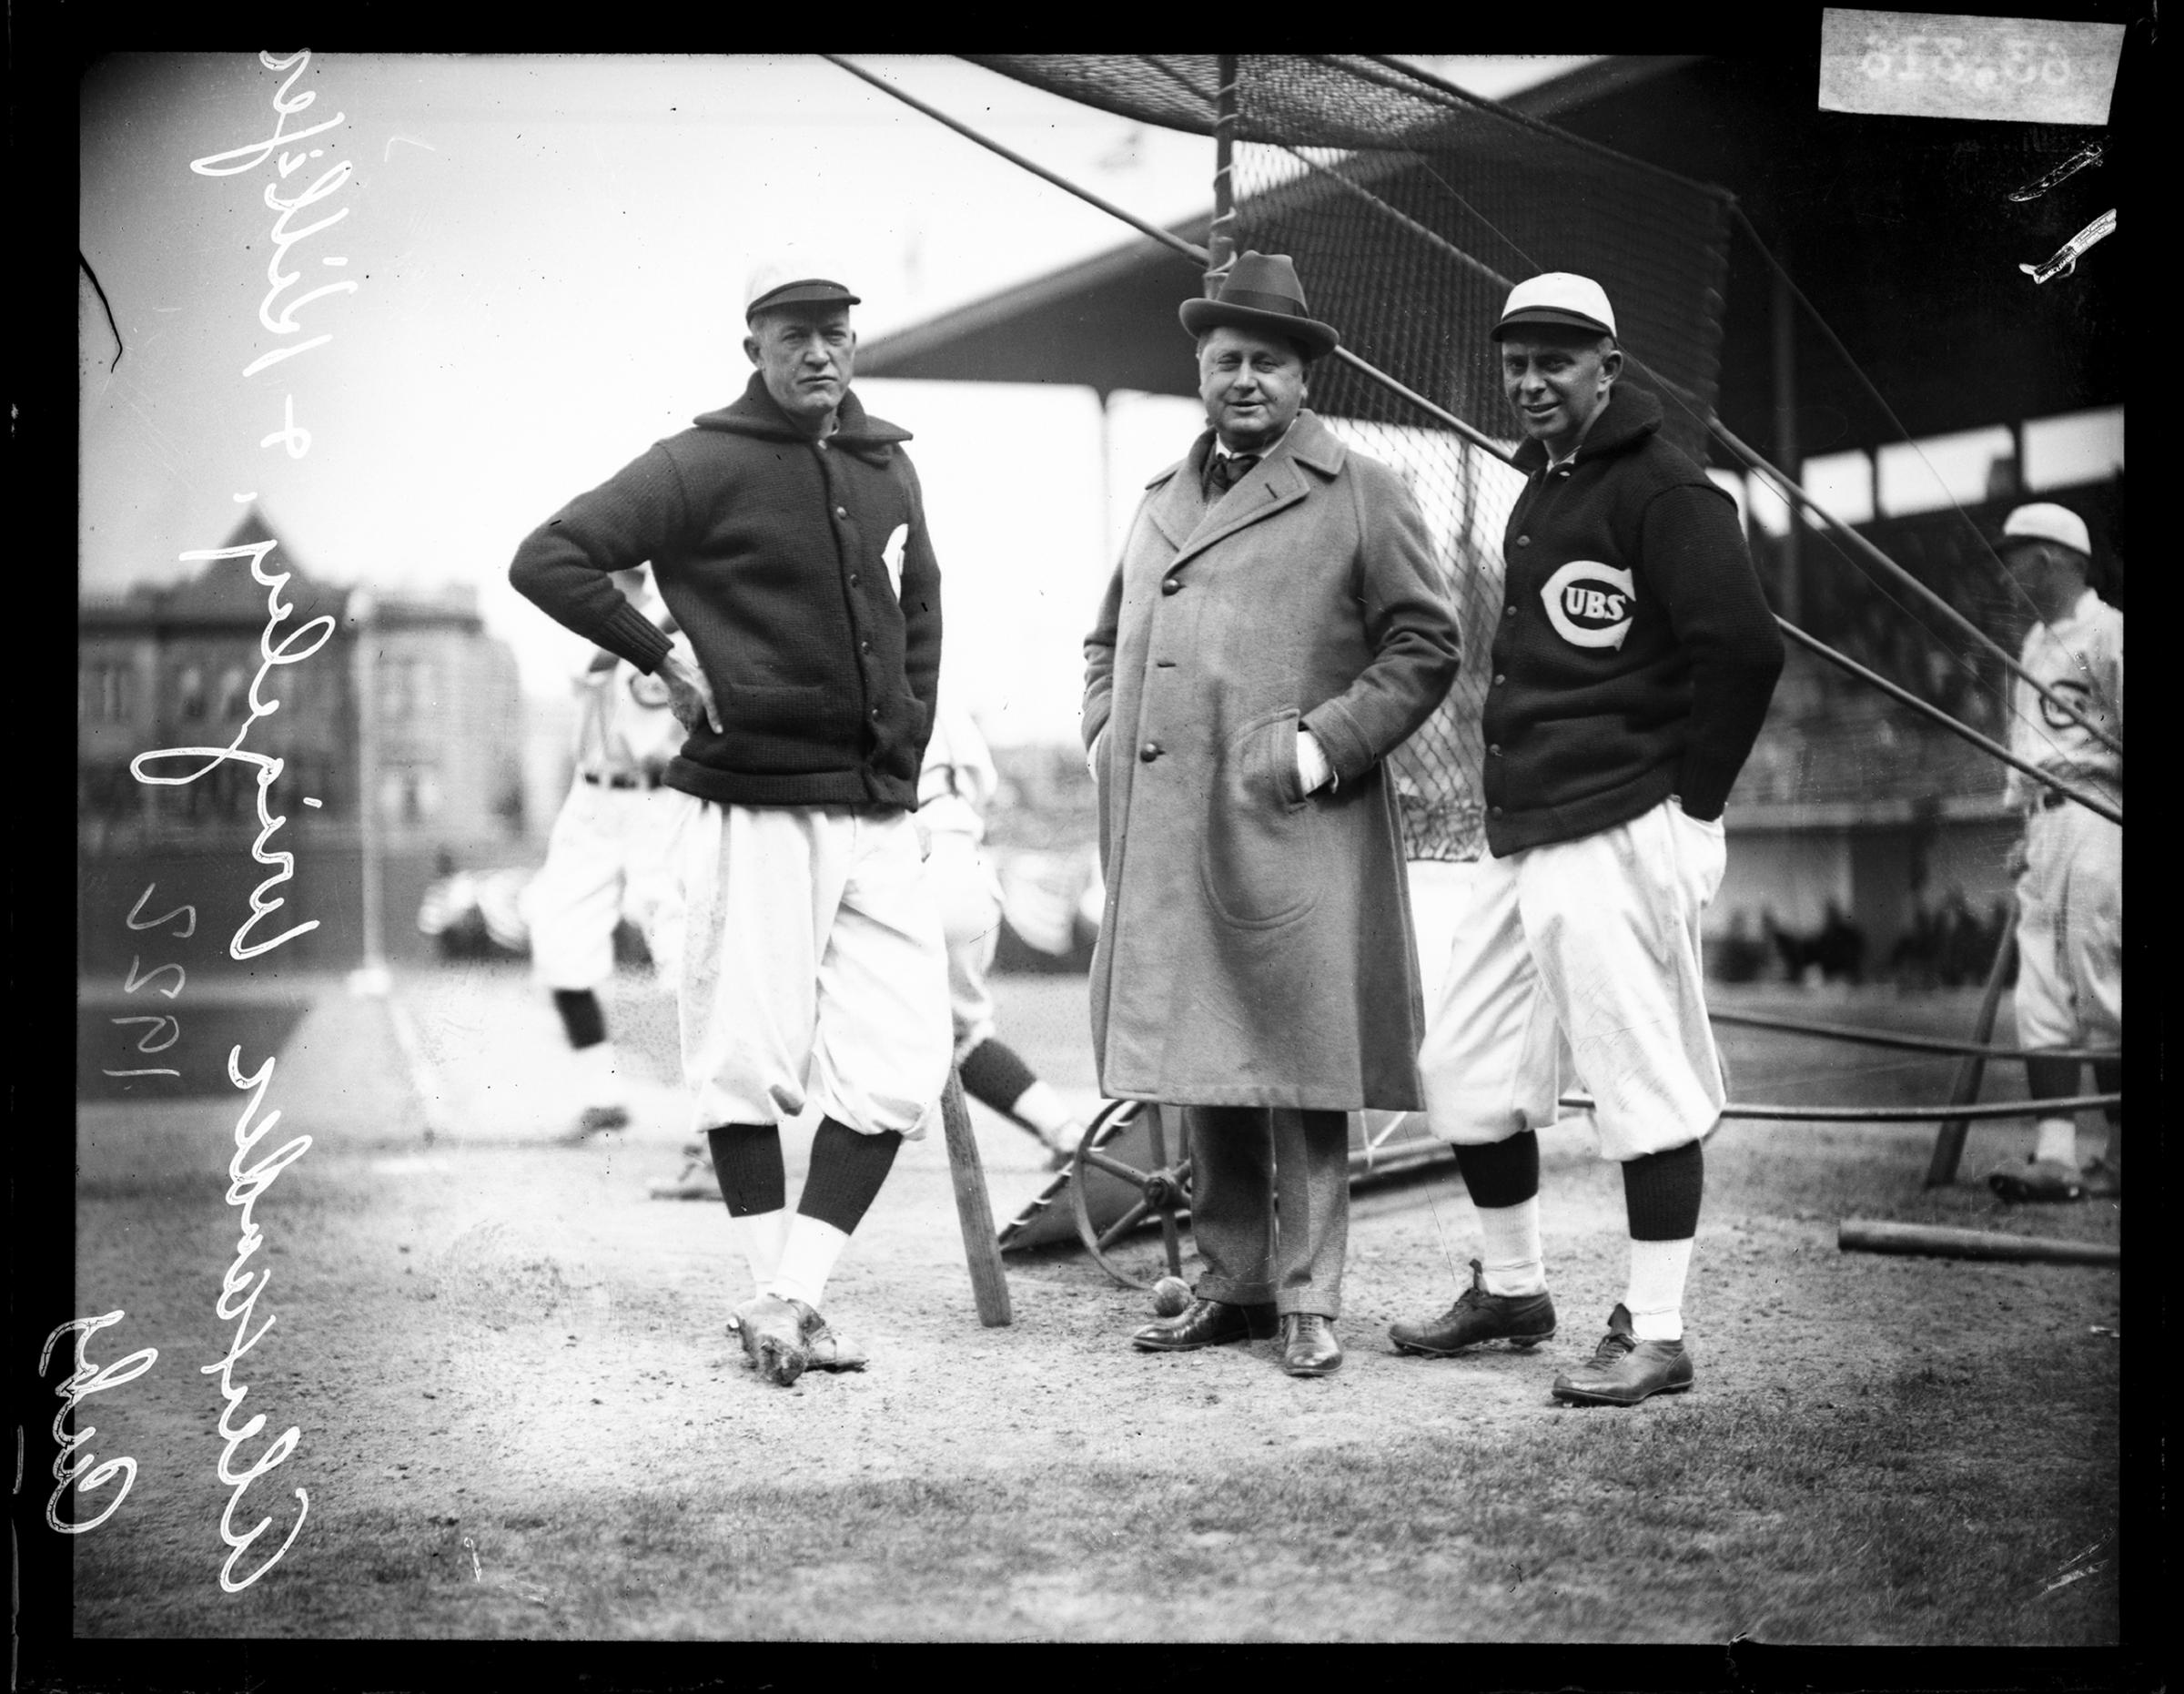 Chicago Cubs baseball player Alexander, co-owner William Wrigley Jr, and manager Bill Killefer standing behind a batting practice backstop on the field at Weeghman Park, located at 1060 West Addison Street, Chicago, Illinois, 1922.